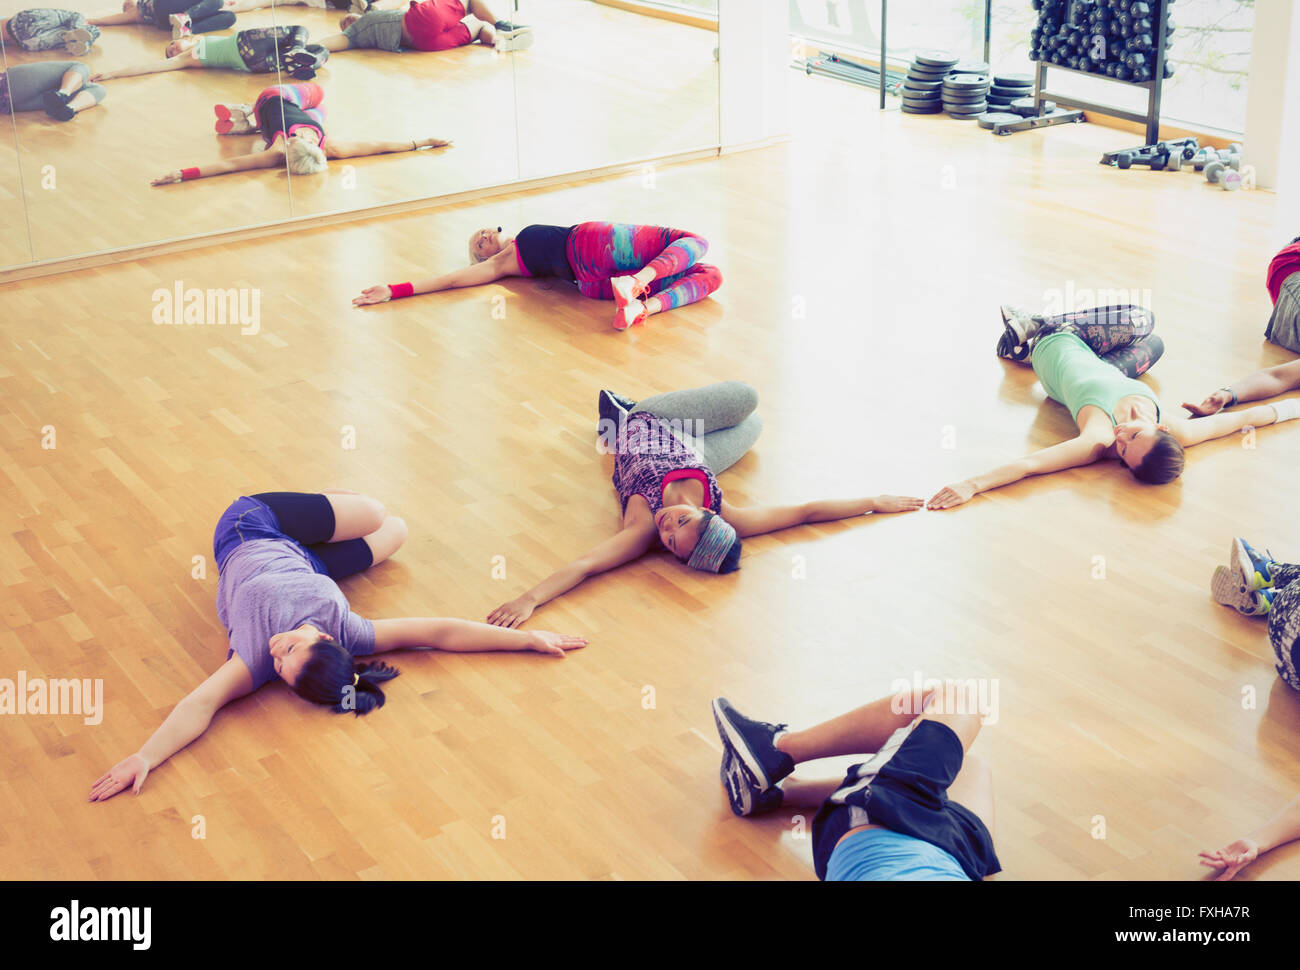 Exercise class doing twisted stretch in studio Stock Photo